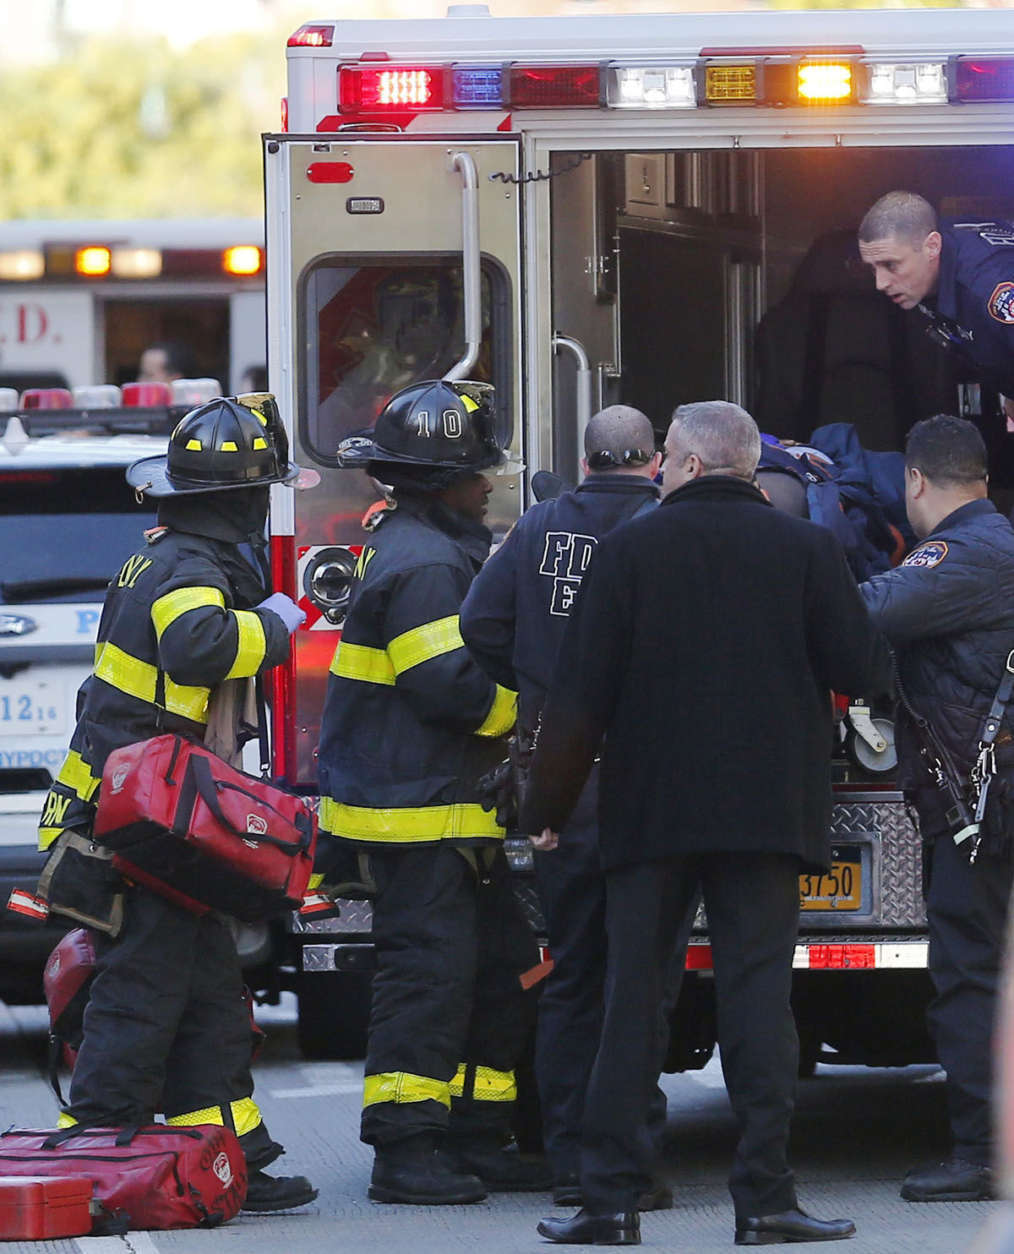 Paramedics lift an individual into an ambulance near the scene after reports of a deadly shooting Tuesday Oct. 31, 2017, in New York. A motorist drove onto a busy bicycle path near the World Trade Center memorial and struck several people Tuesday, police and witnesses said. (AP Photo/Bebeto Matthews)